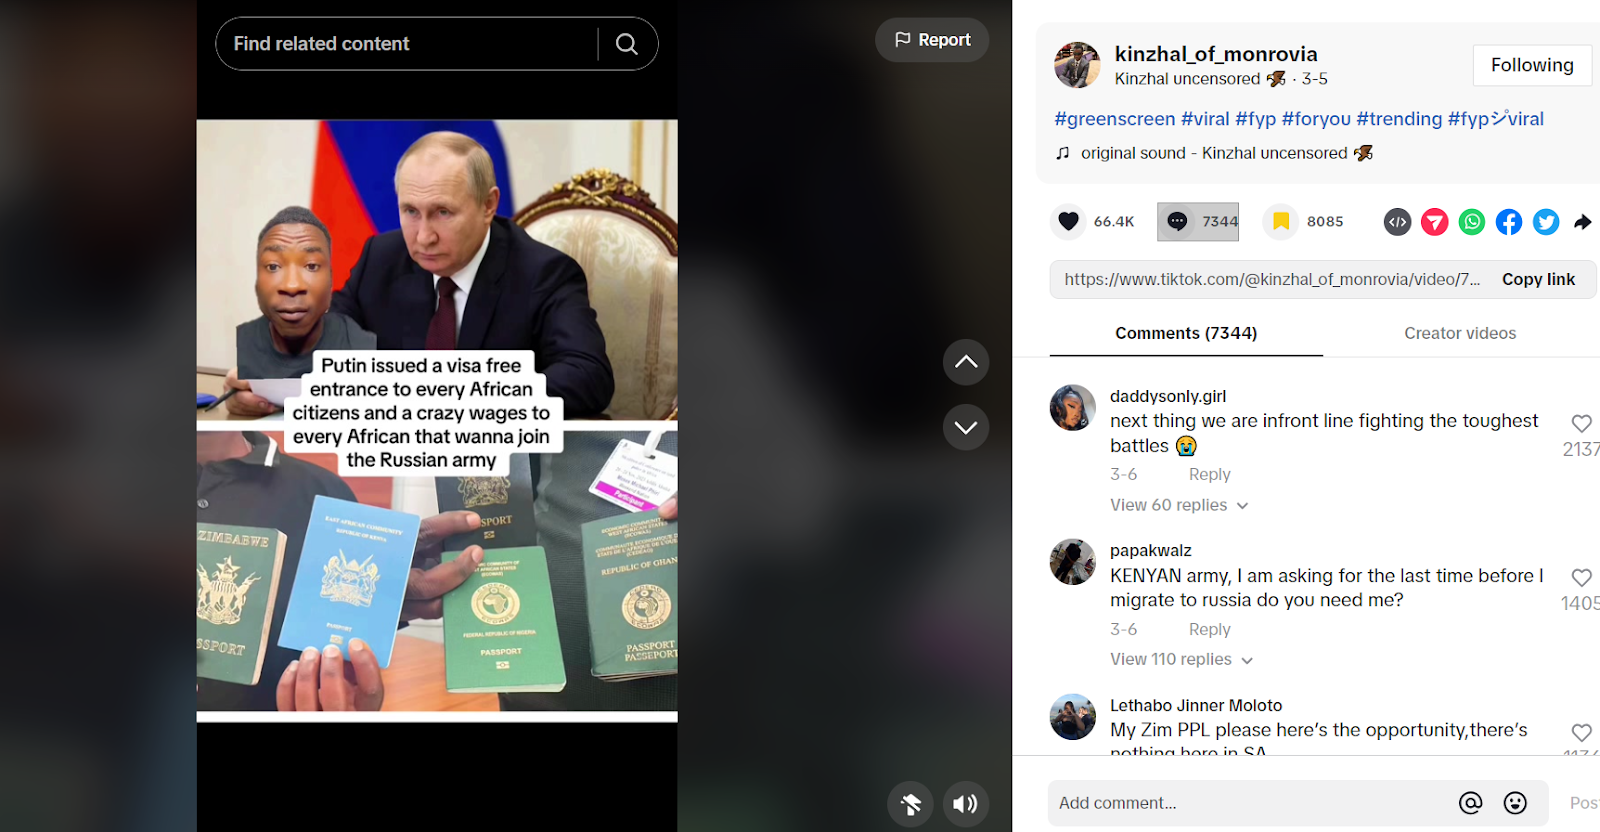 A Popular Tiktok Account Is Encouraging Africans to Join the Russian Army. Here’s What We Found About It